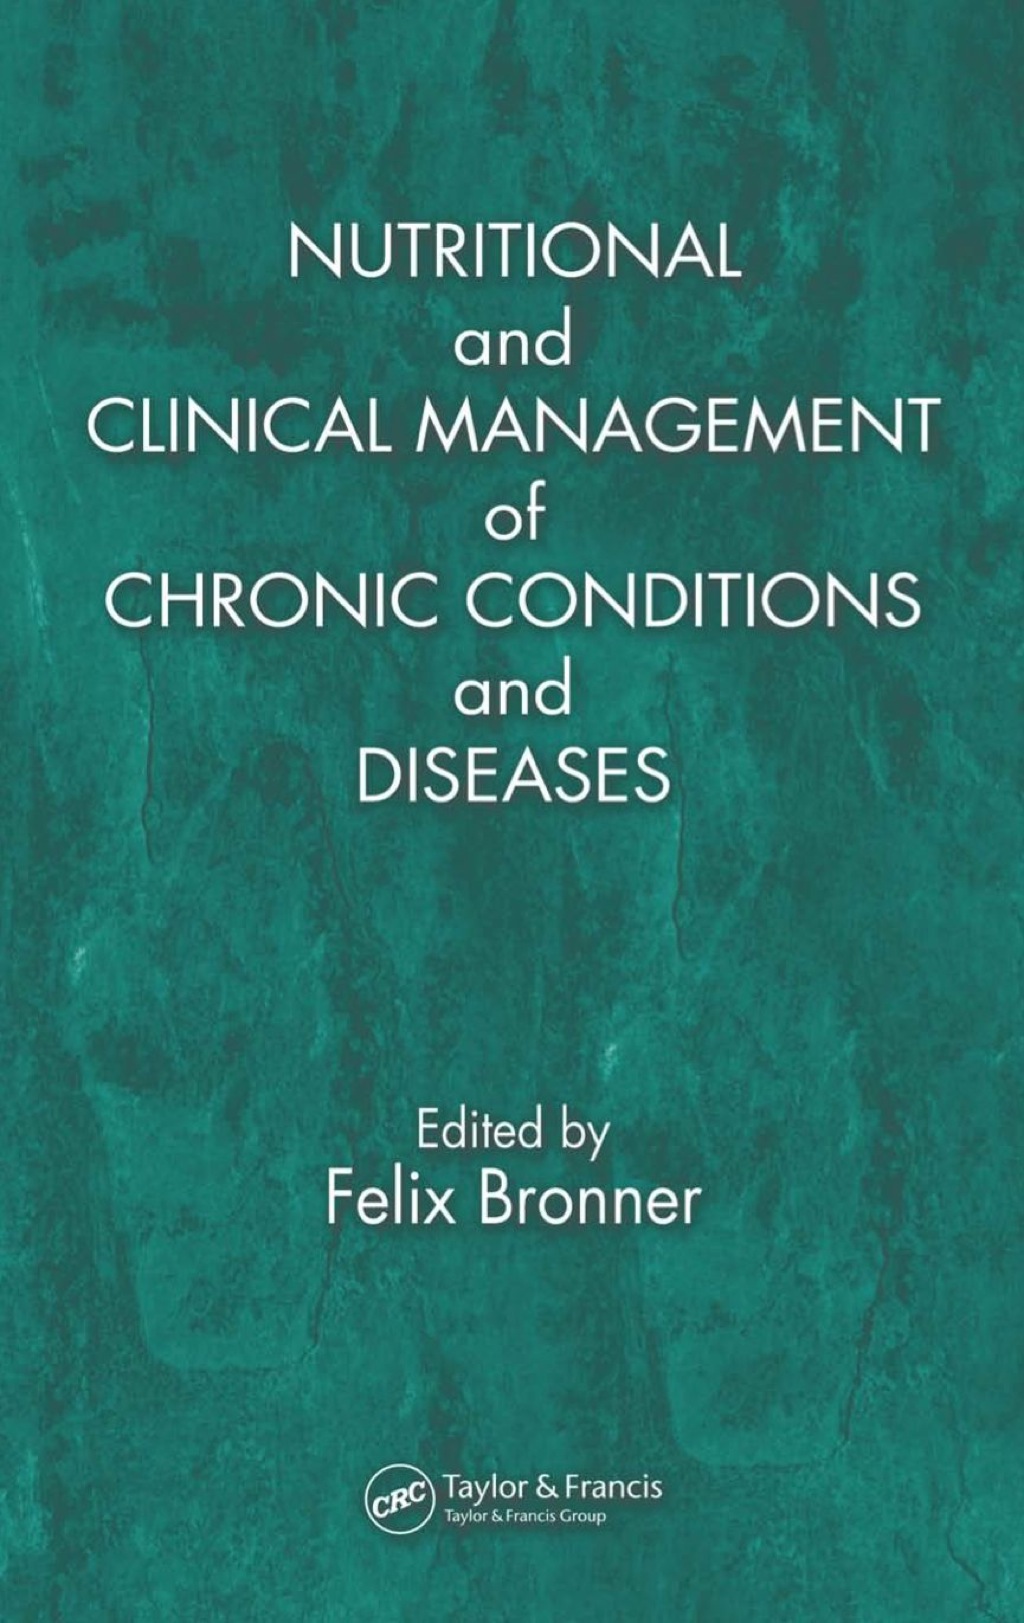 Nutritional and Clinical Management of Chronic Conditions and Diseases (eBook) - Felix Bronner